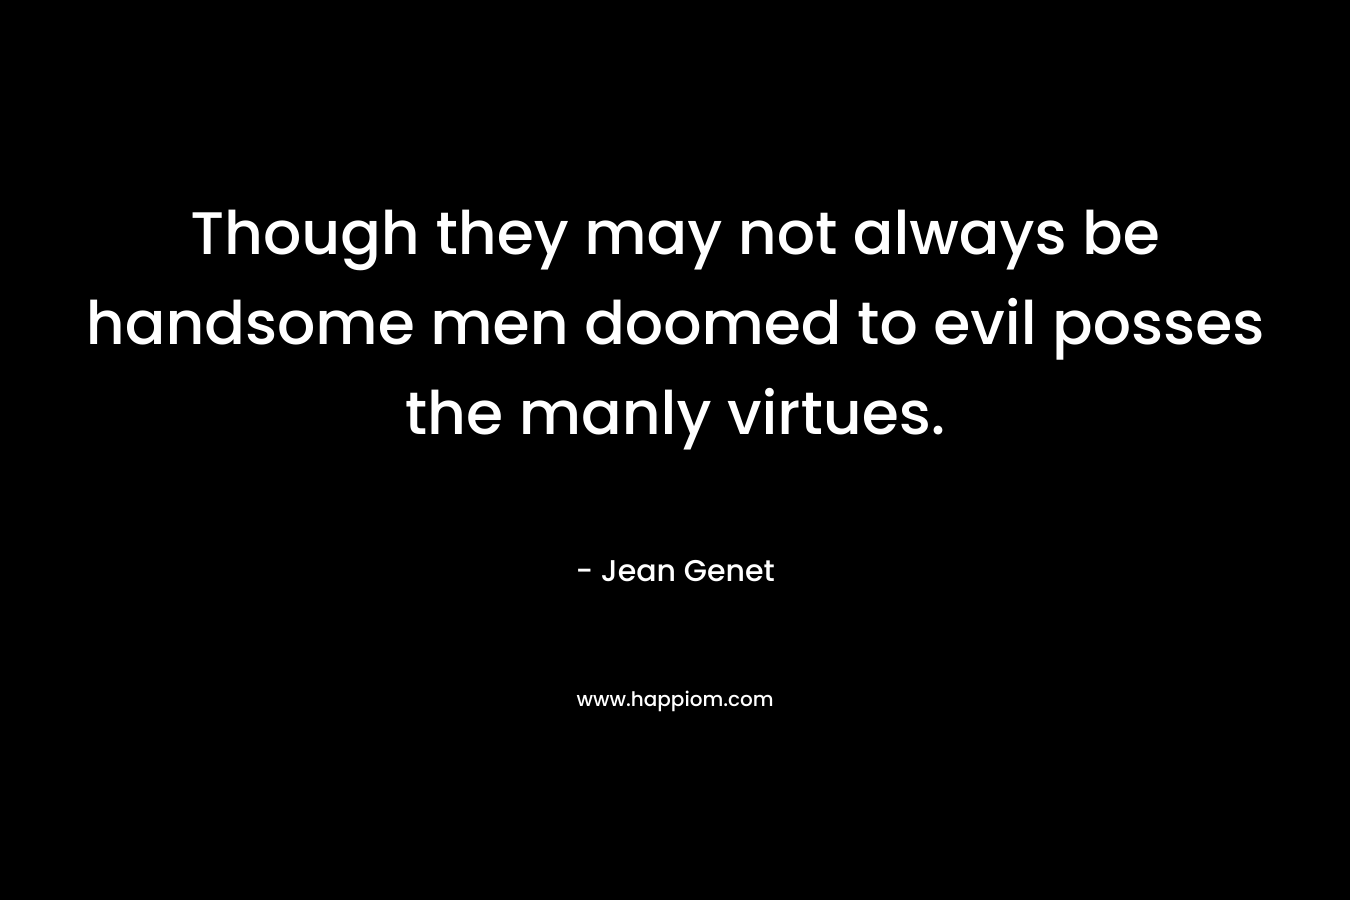 Though they may not always be handsome men doomed to evil posses the manly virtues.